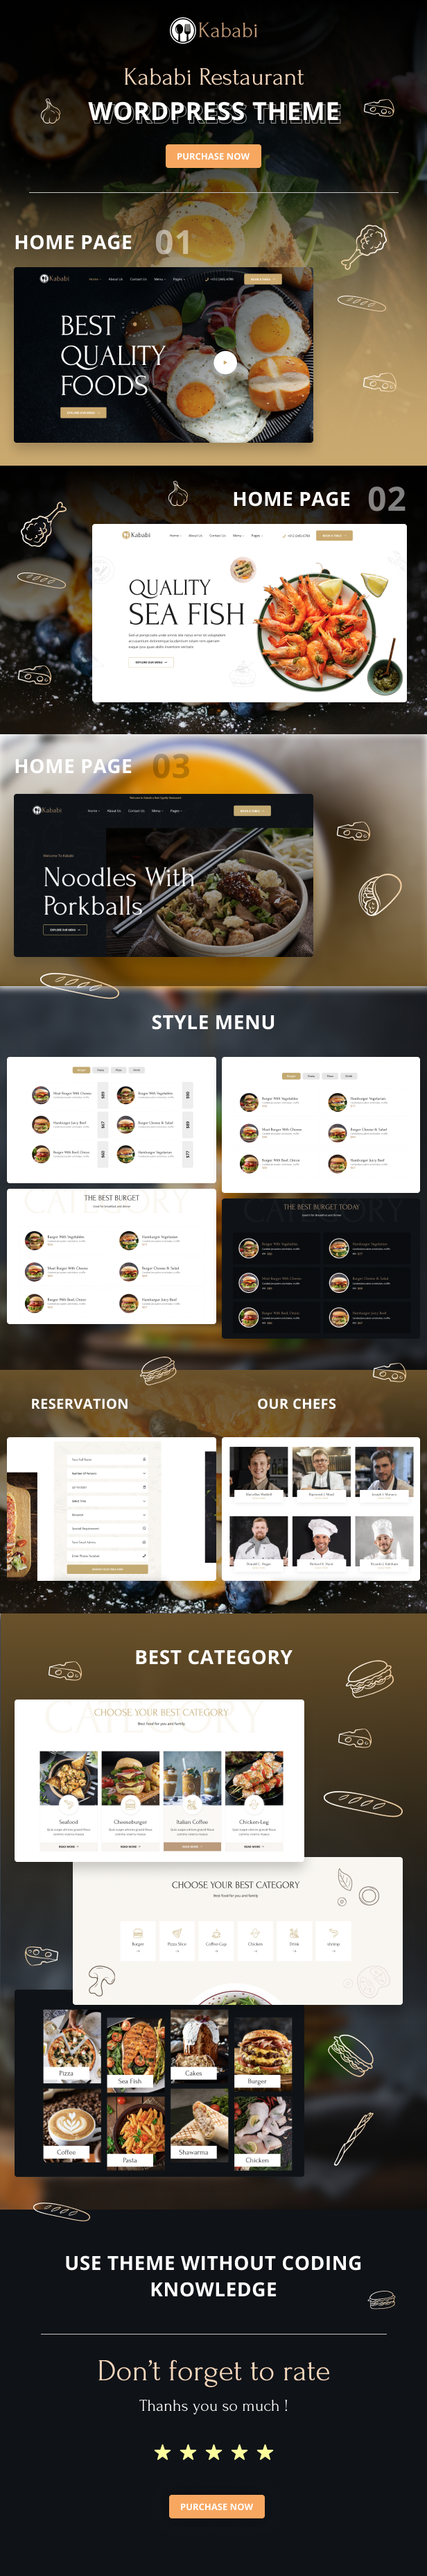 Stylish dark template for your restaurant business.